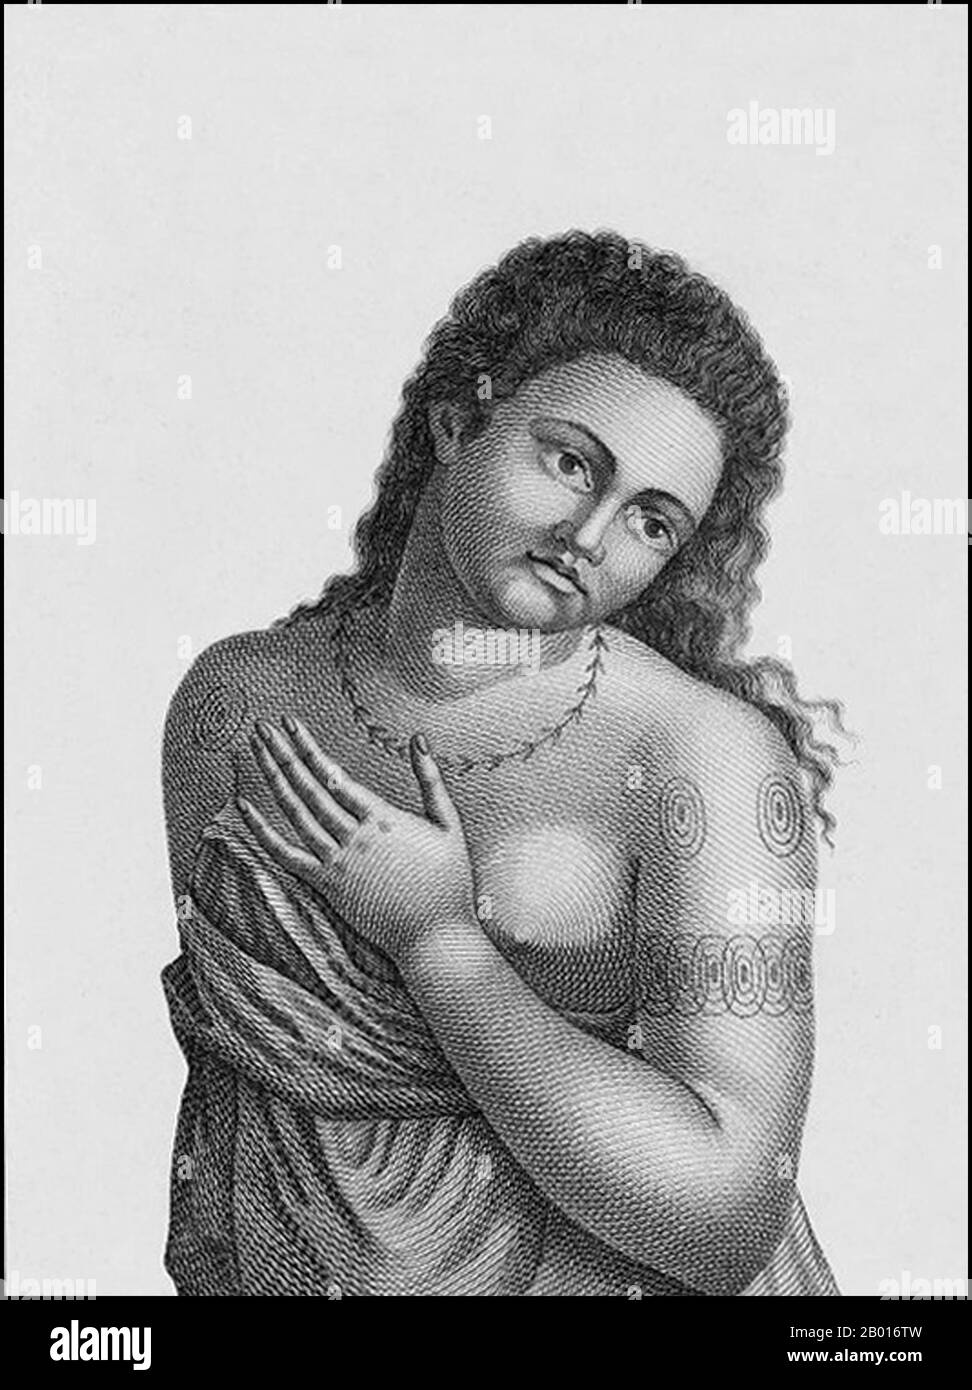 Papua New Guinea: A female inhabitant of the Admiralty Islands. Engraving from 'Atlas du Voyage de La Pérouse' by Jean Piron (1767-1797) & Jacques-Louis Copia (1764-1799), 1792.  Jean-François de Galaup, Comte de La Pérouse (1741-1788) was a French explorer and naval officer. In 1785, the King of France commissioned La Perouse to head an expedition to explore the Pacific Ocean, to investigate whaling and fur prospects, and to establish French claims in this area. La Pérouse had admired the explorer James Cook, and wanted to continue his work. Stock Photo